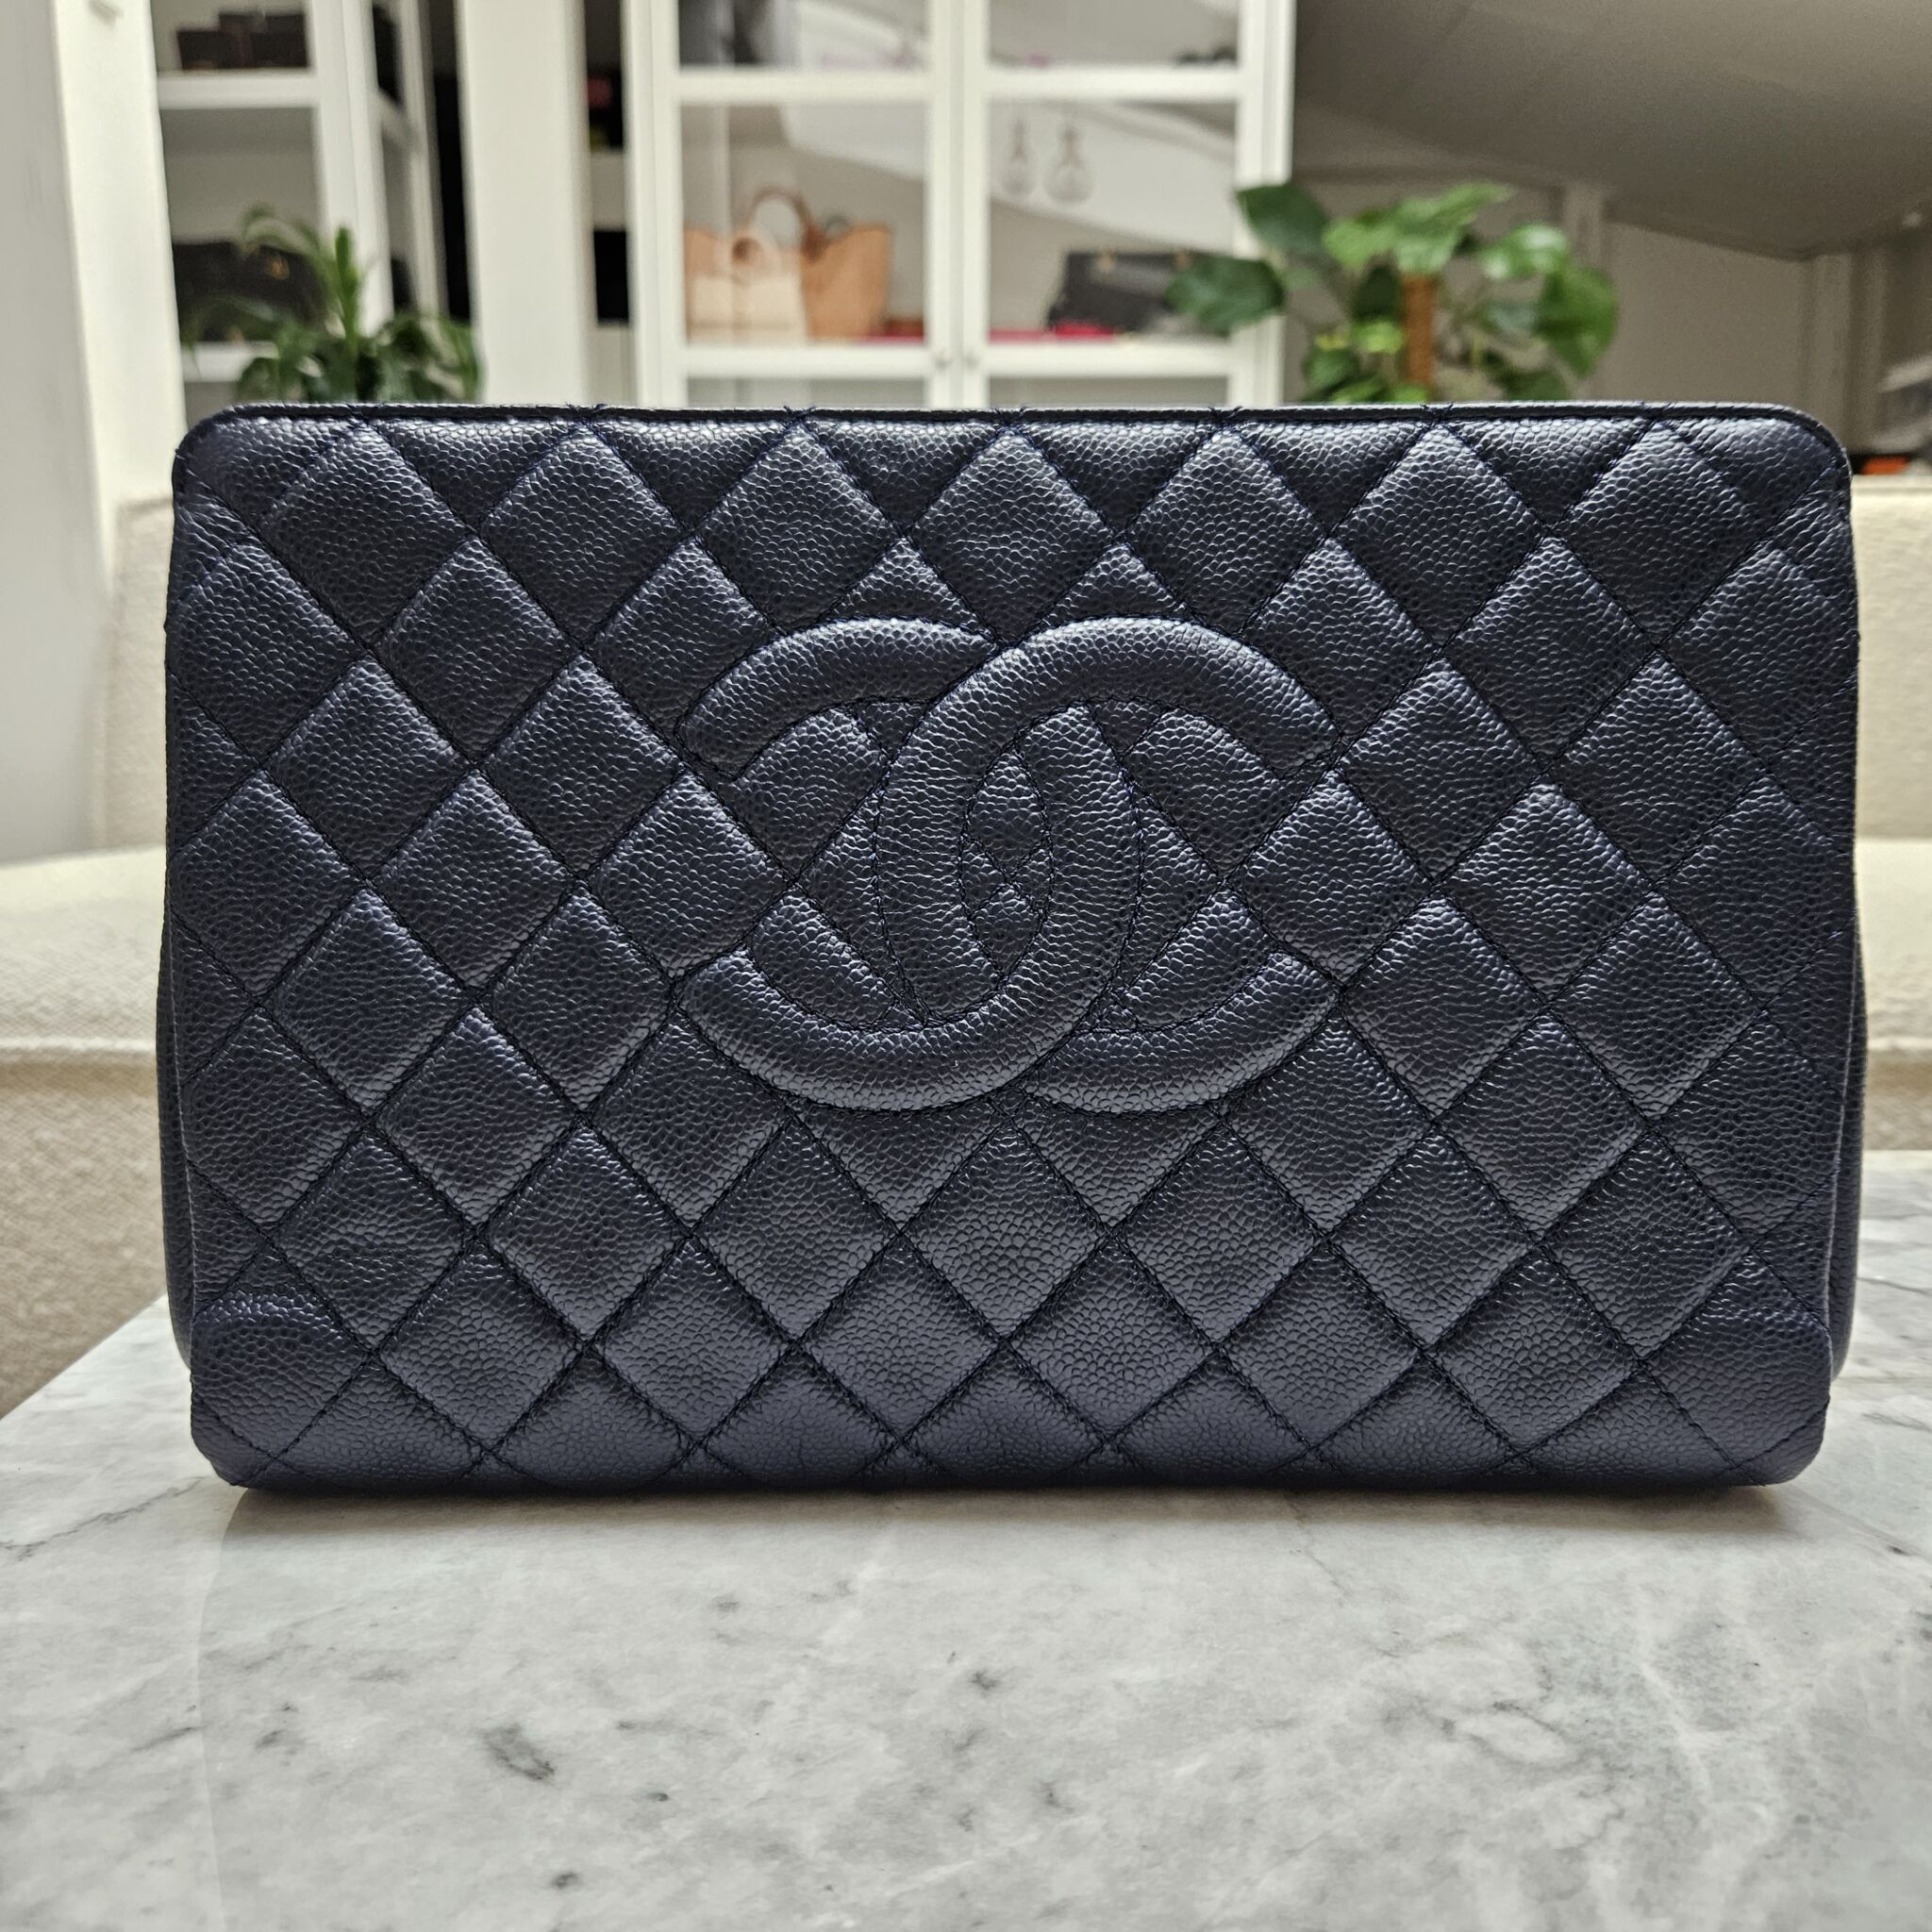 Chanel Large Timeless Clutch, Caviar, Navy - Laulay Luxury